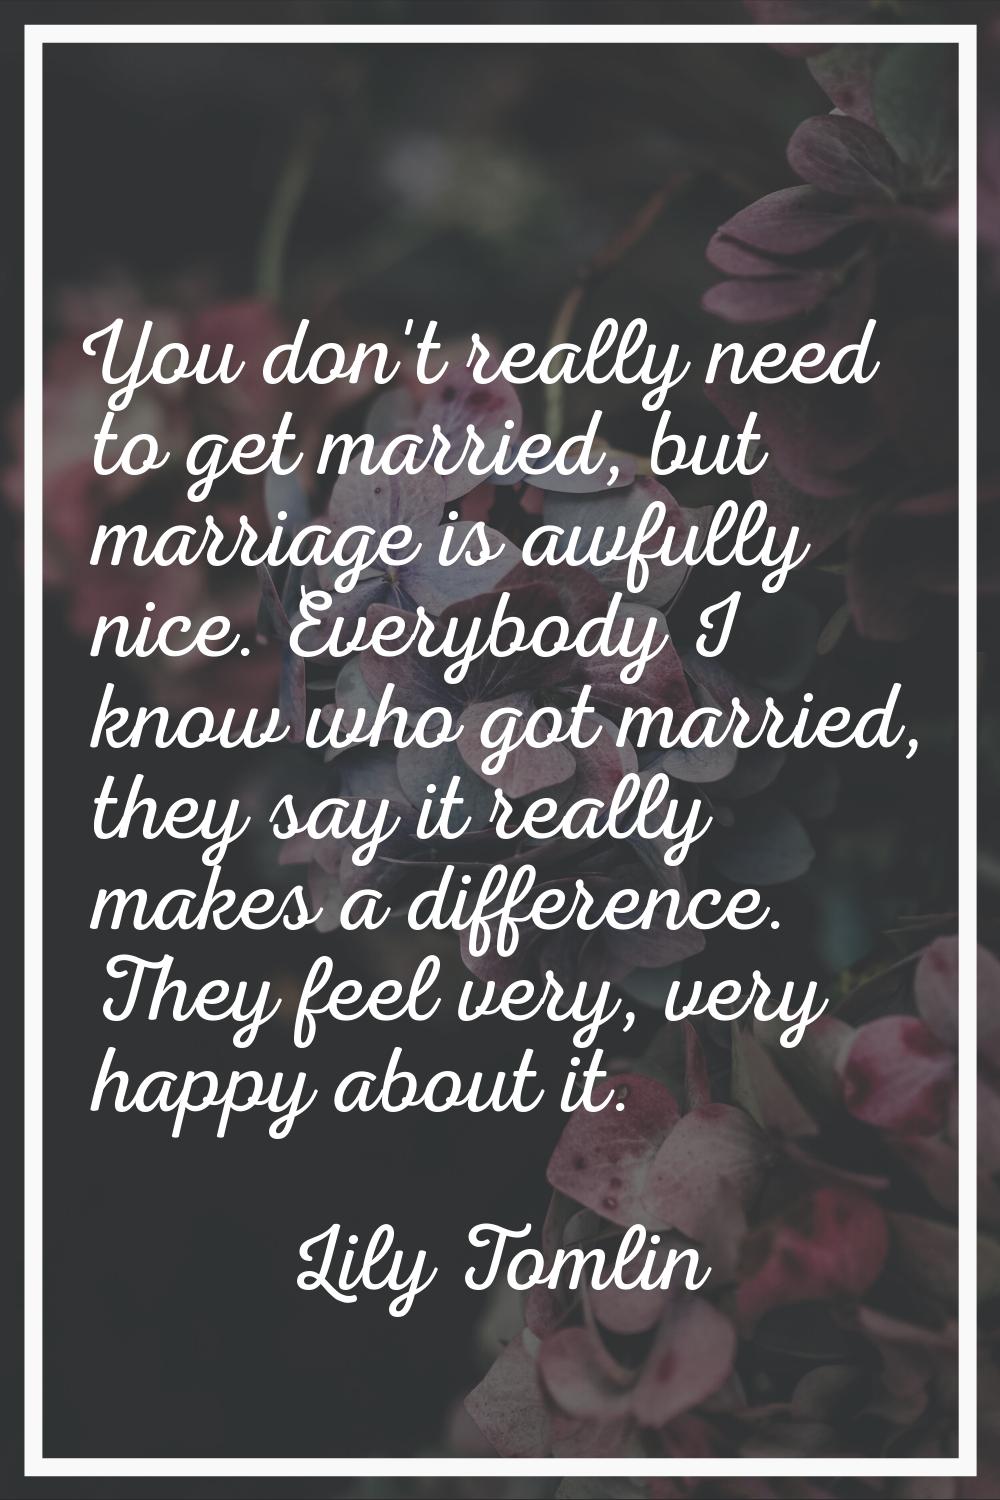 You don't really need to get married, but marriage is awfully nice. Everybody I know who got marrie